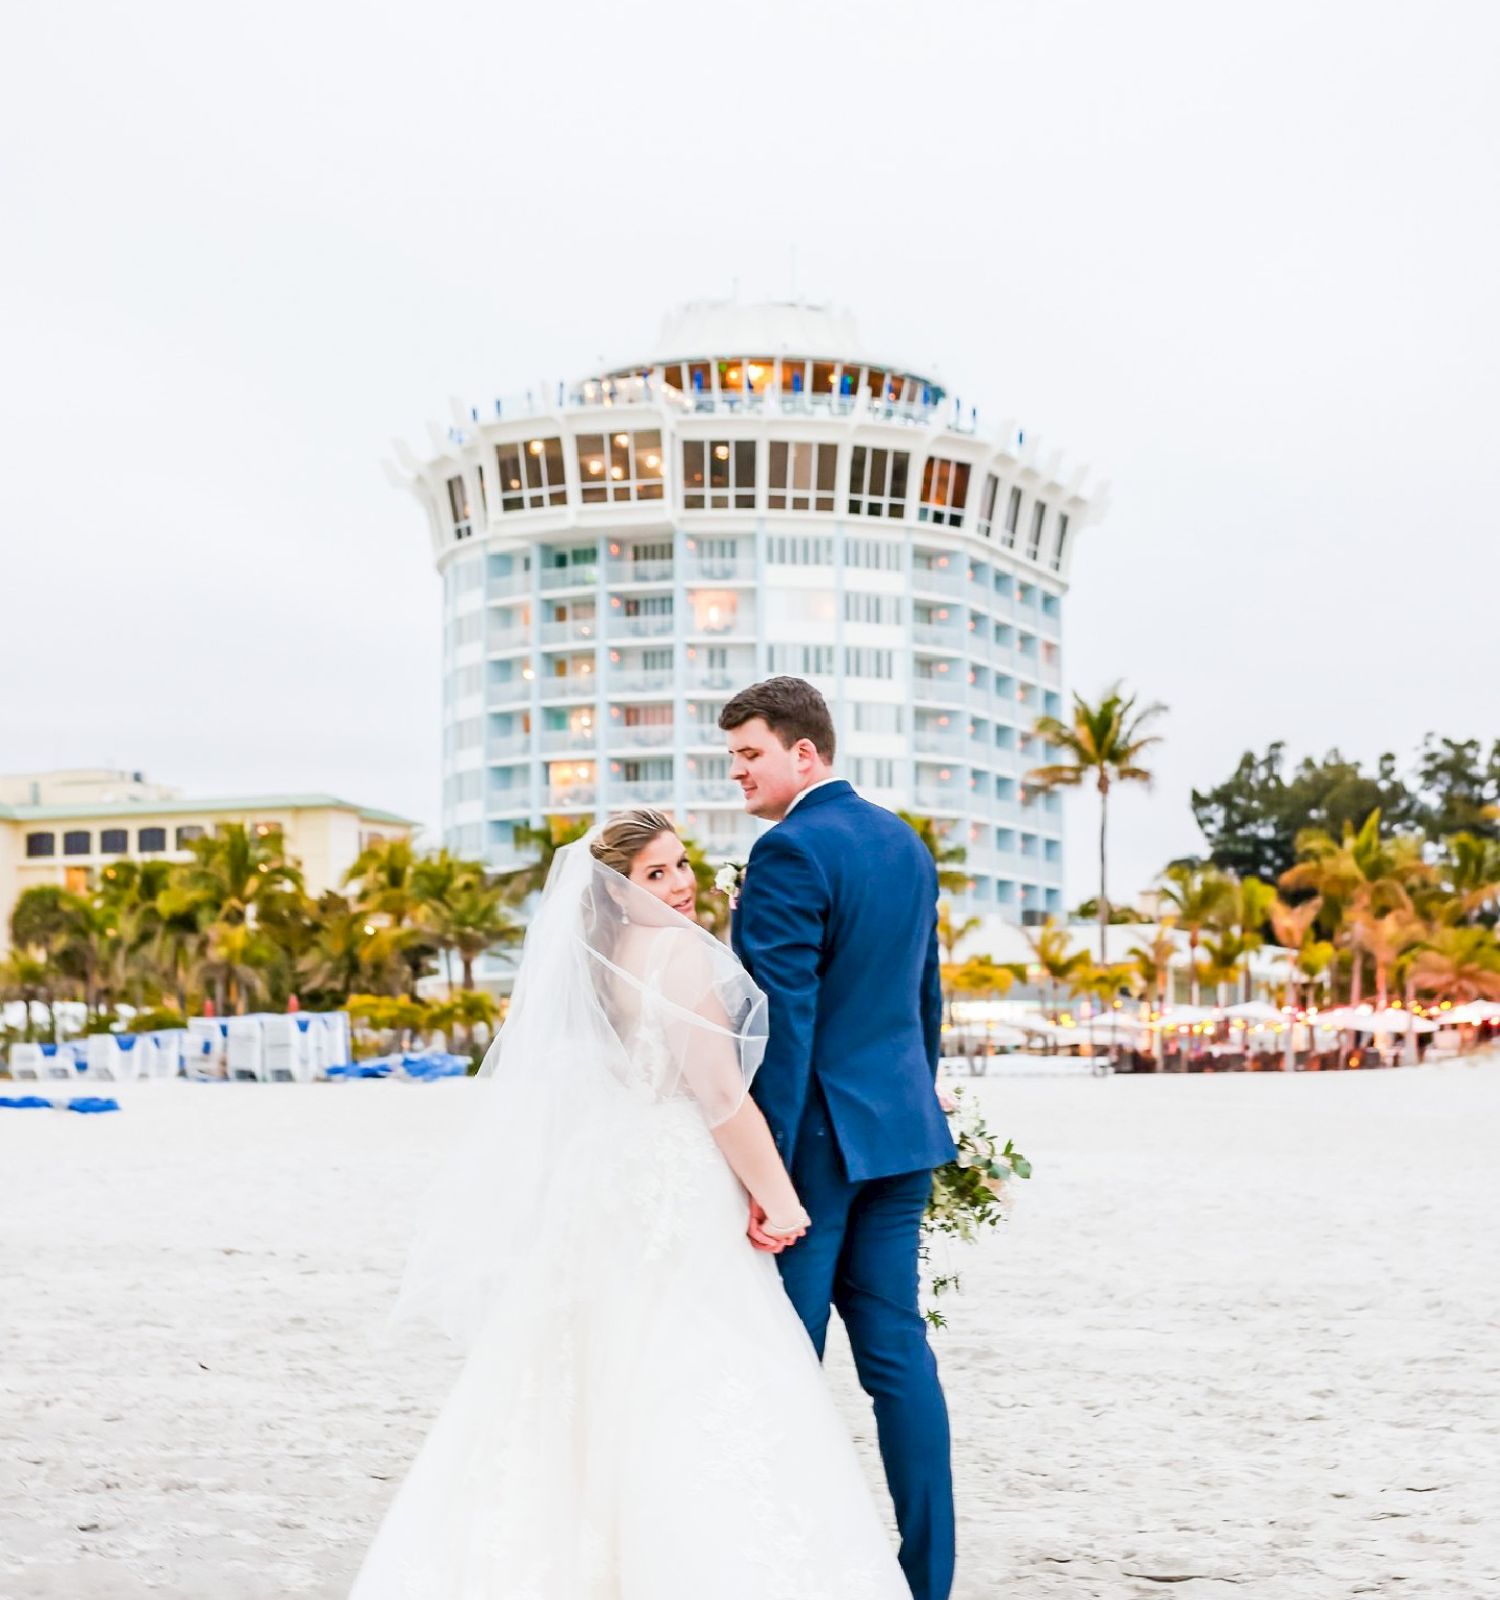 A couple in wedding attire stands on a beach; a round building in the background.